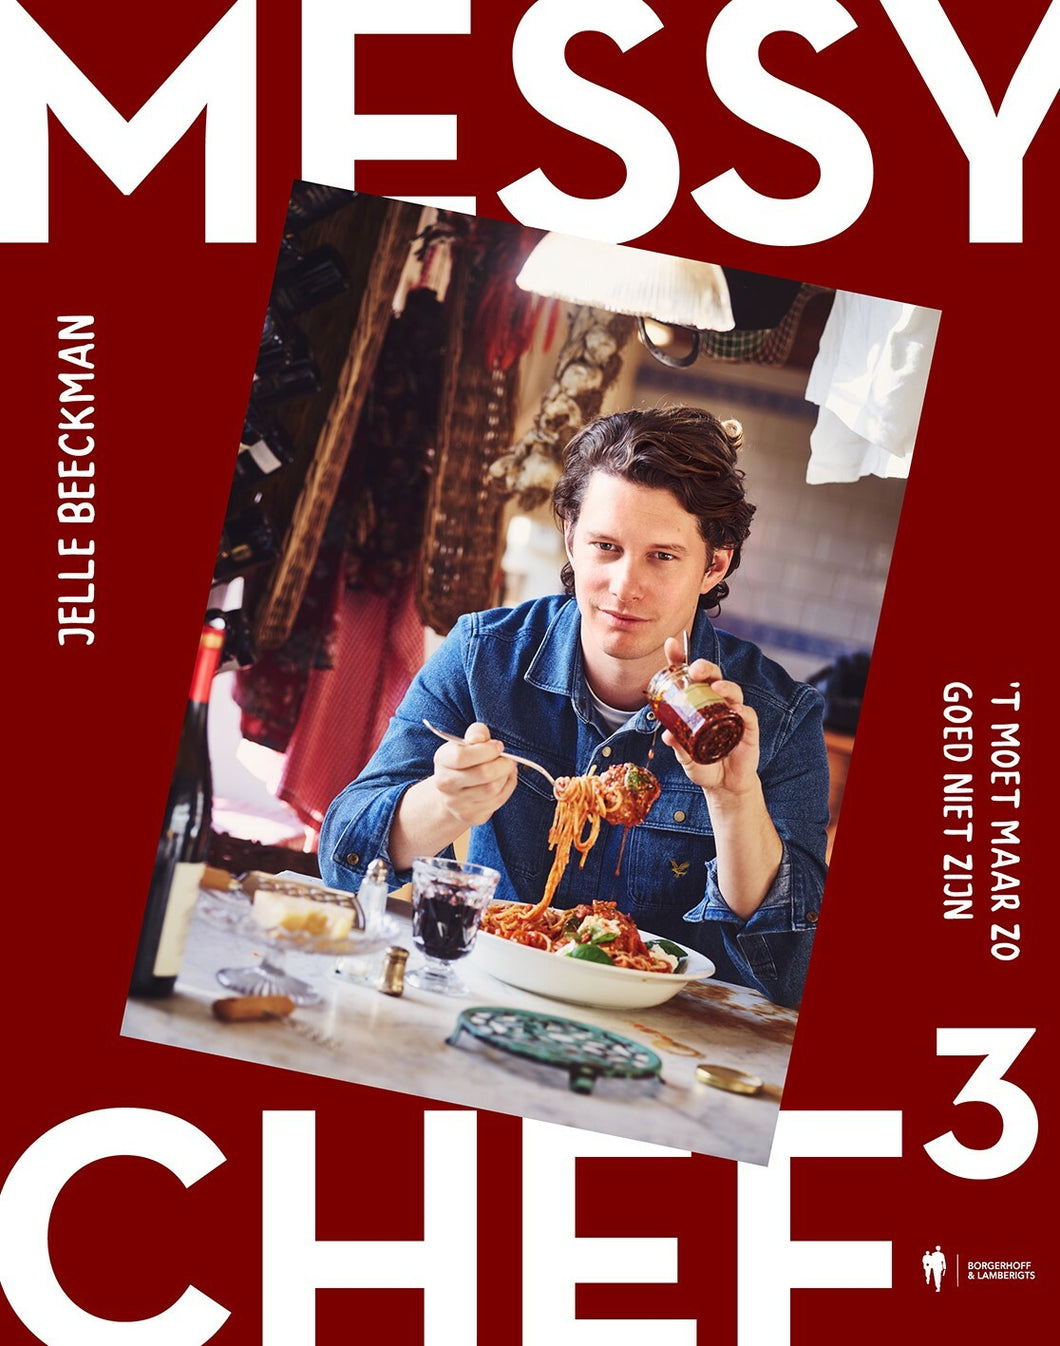 Messy chef 3 - Jelle Beeckman